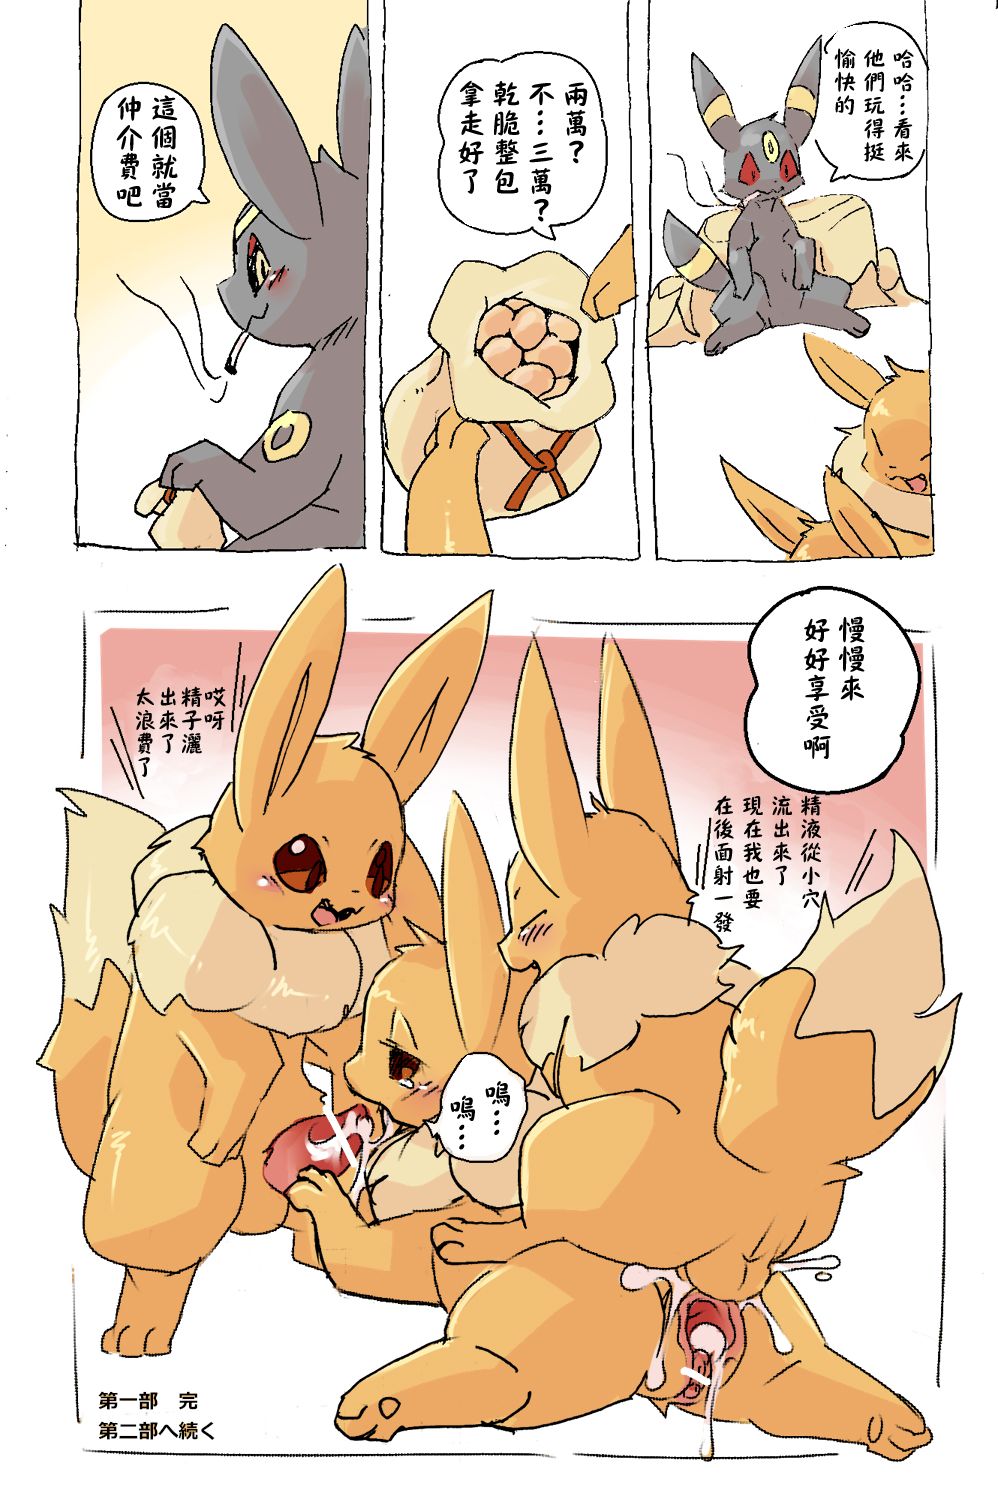 Eevee and Umbreon [Chinese] あなろぐ - Eevee and Umbreon